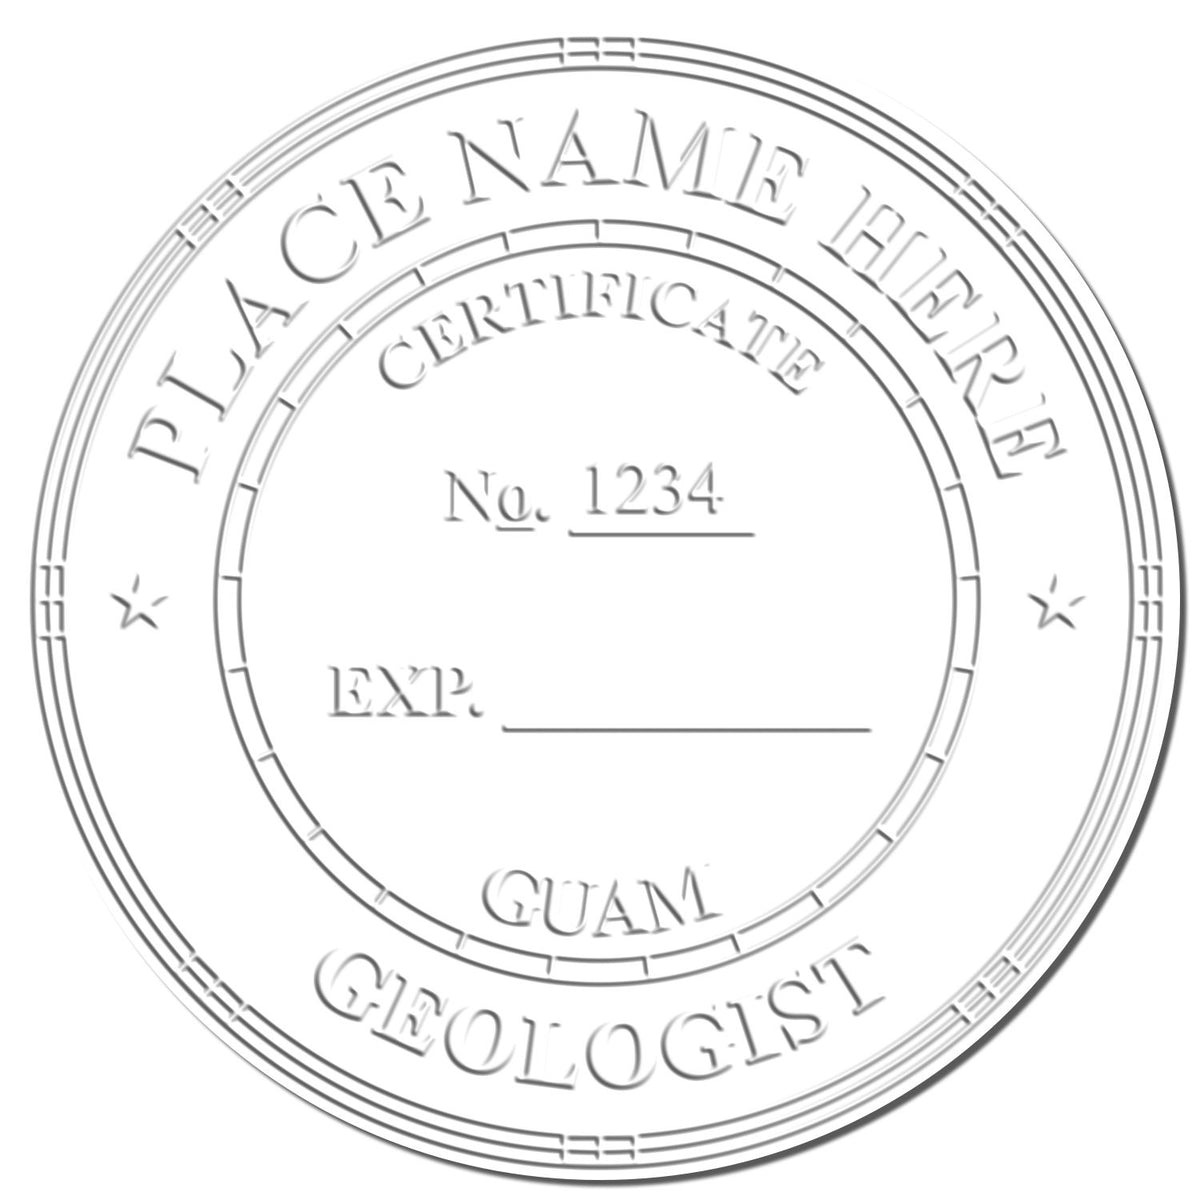 An in use photo of the Heavy Duty Cast Iron Guam Geologist Seal Embosser showing a sample imprint on a cardstock